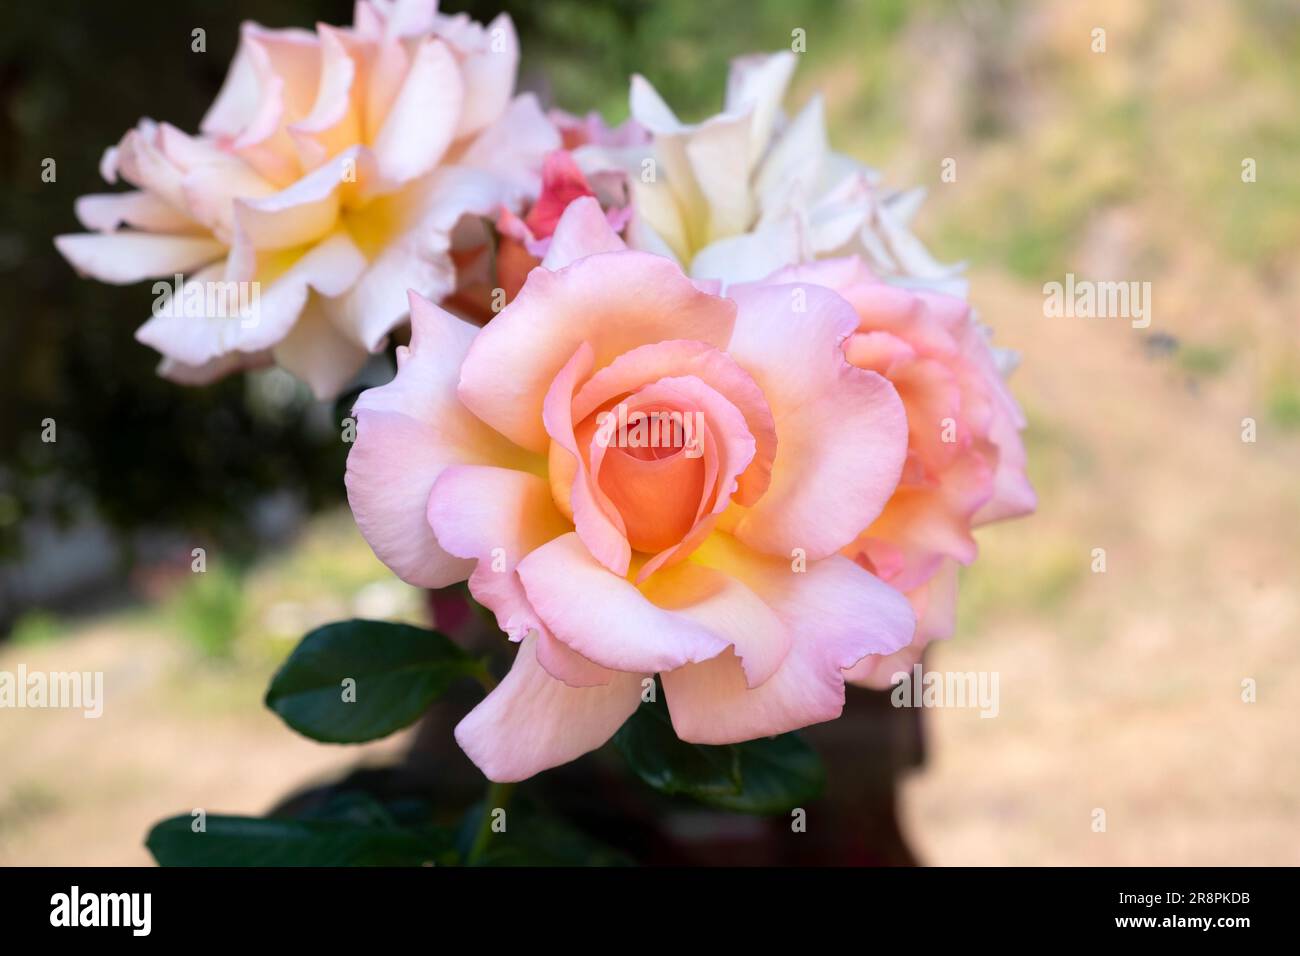 Closeup view of cluster of David Austin fragrant Compassion rose in bloom in June garden 2023 Carmarthenshire Wales UK  KATHY DEWITT Stock Photo